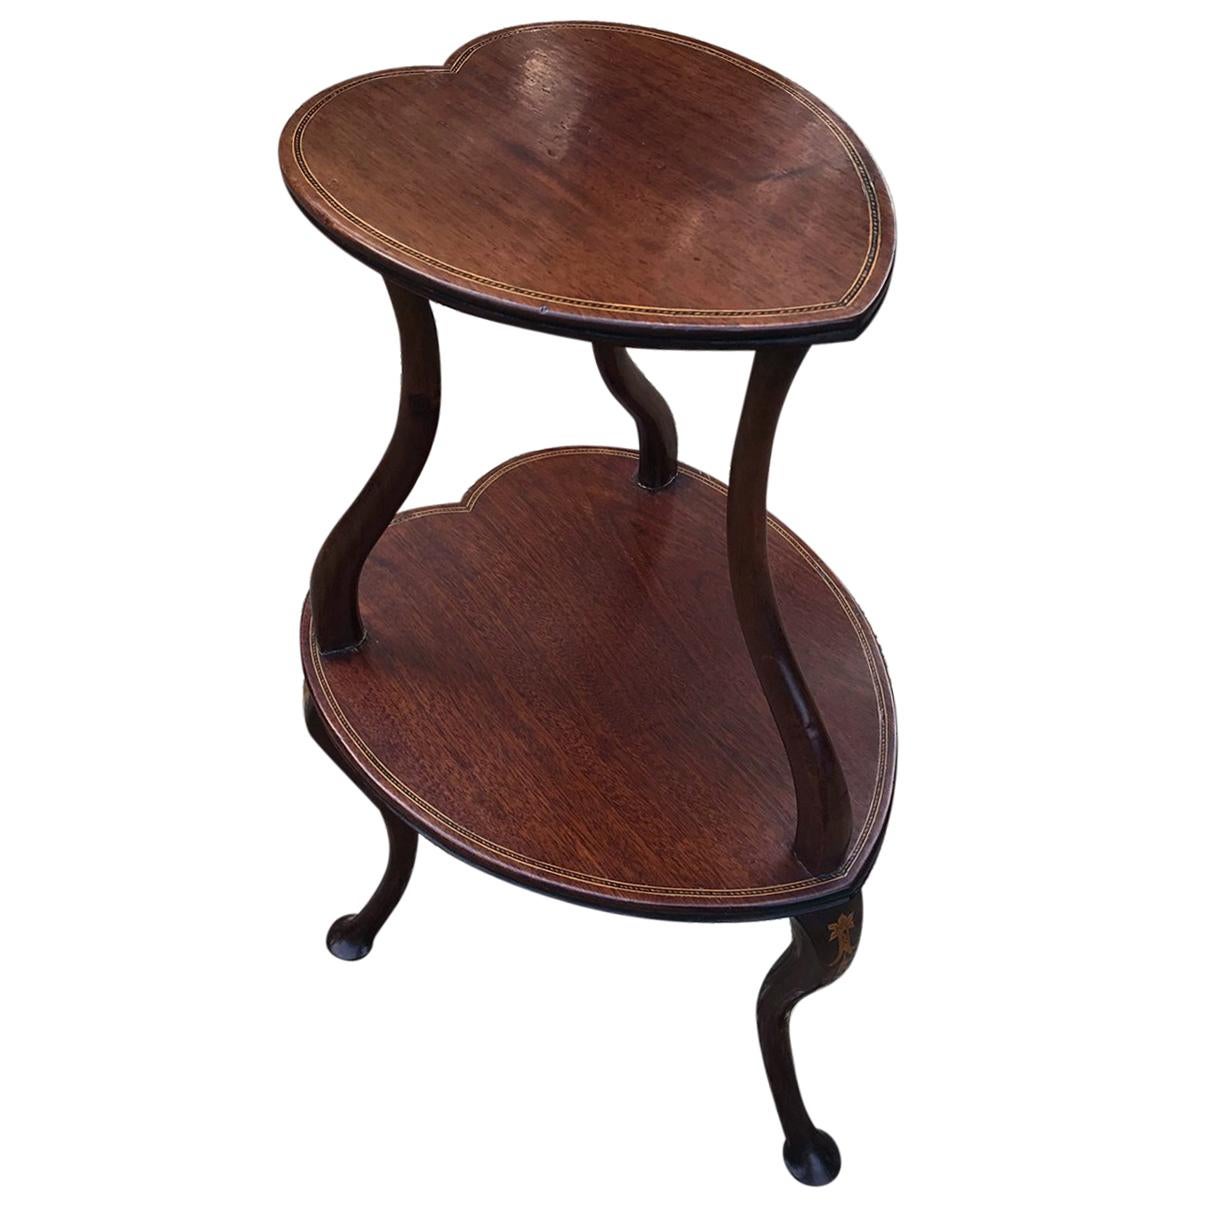 19th Century Mahogany Inlaid Heart Shaped Occasional Table with Two Tiers